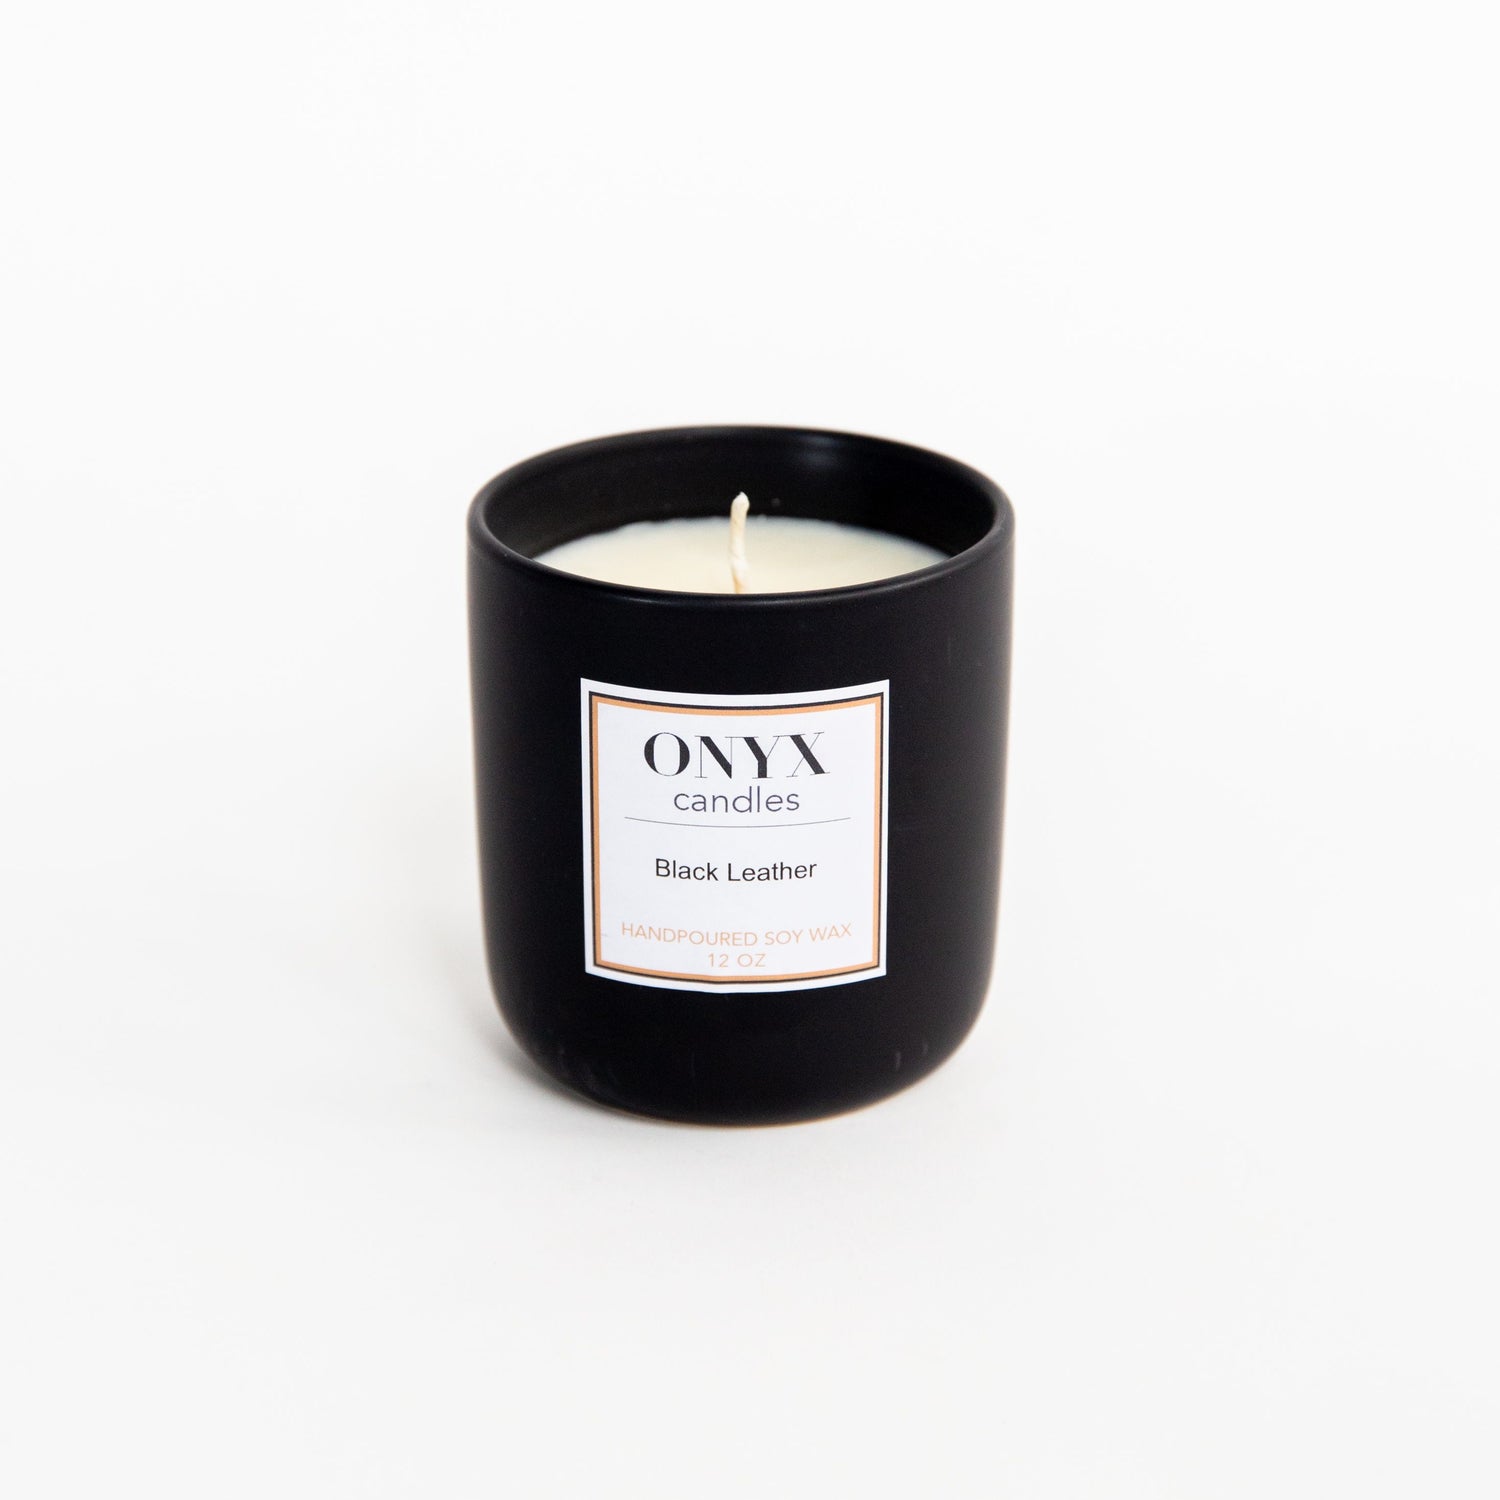 Pictured here is the 12 oz matte black ceramic candle, in the scent of Black Leather